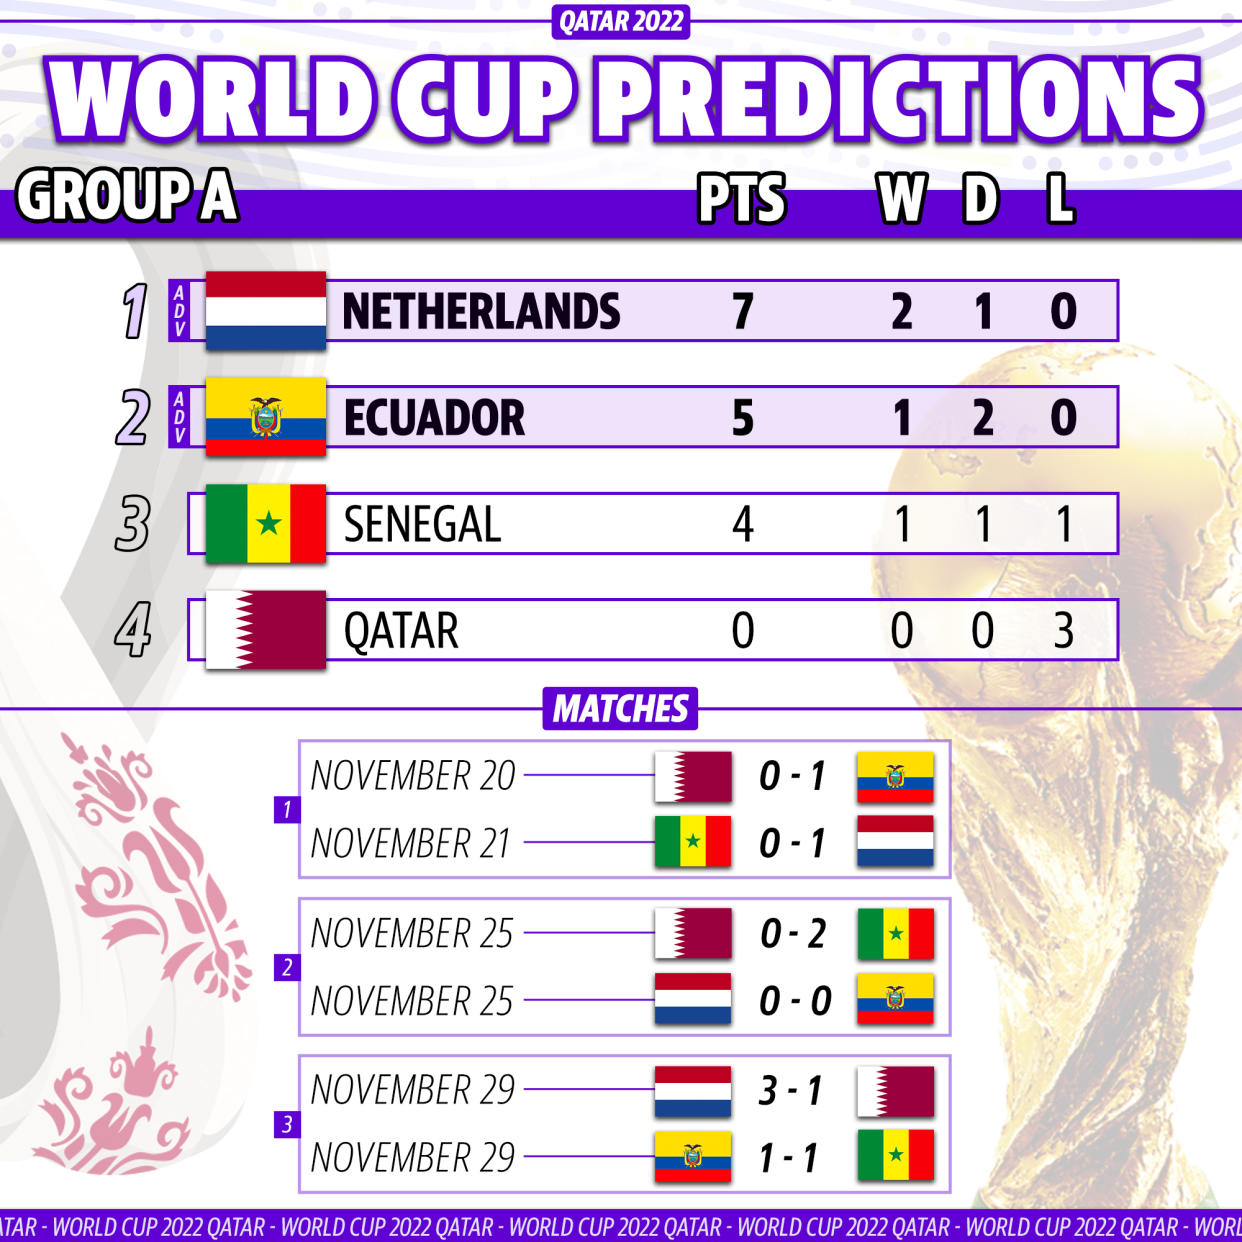 Yahoo Sports soccer writer Henry Bushnell's prediction for how Group A plays out at the 2022 World Cup. (Graphic by Michael Wagstaffe/Yahoo Sports)